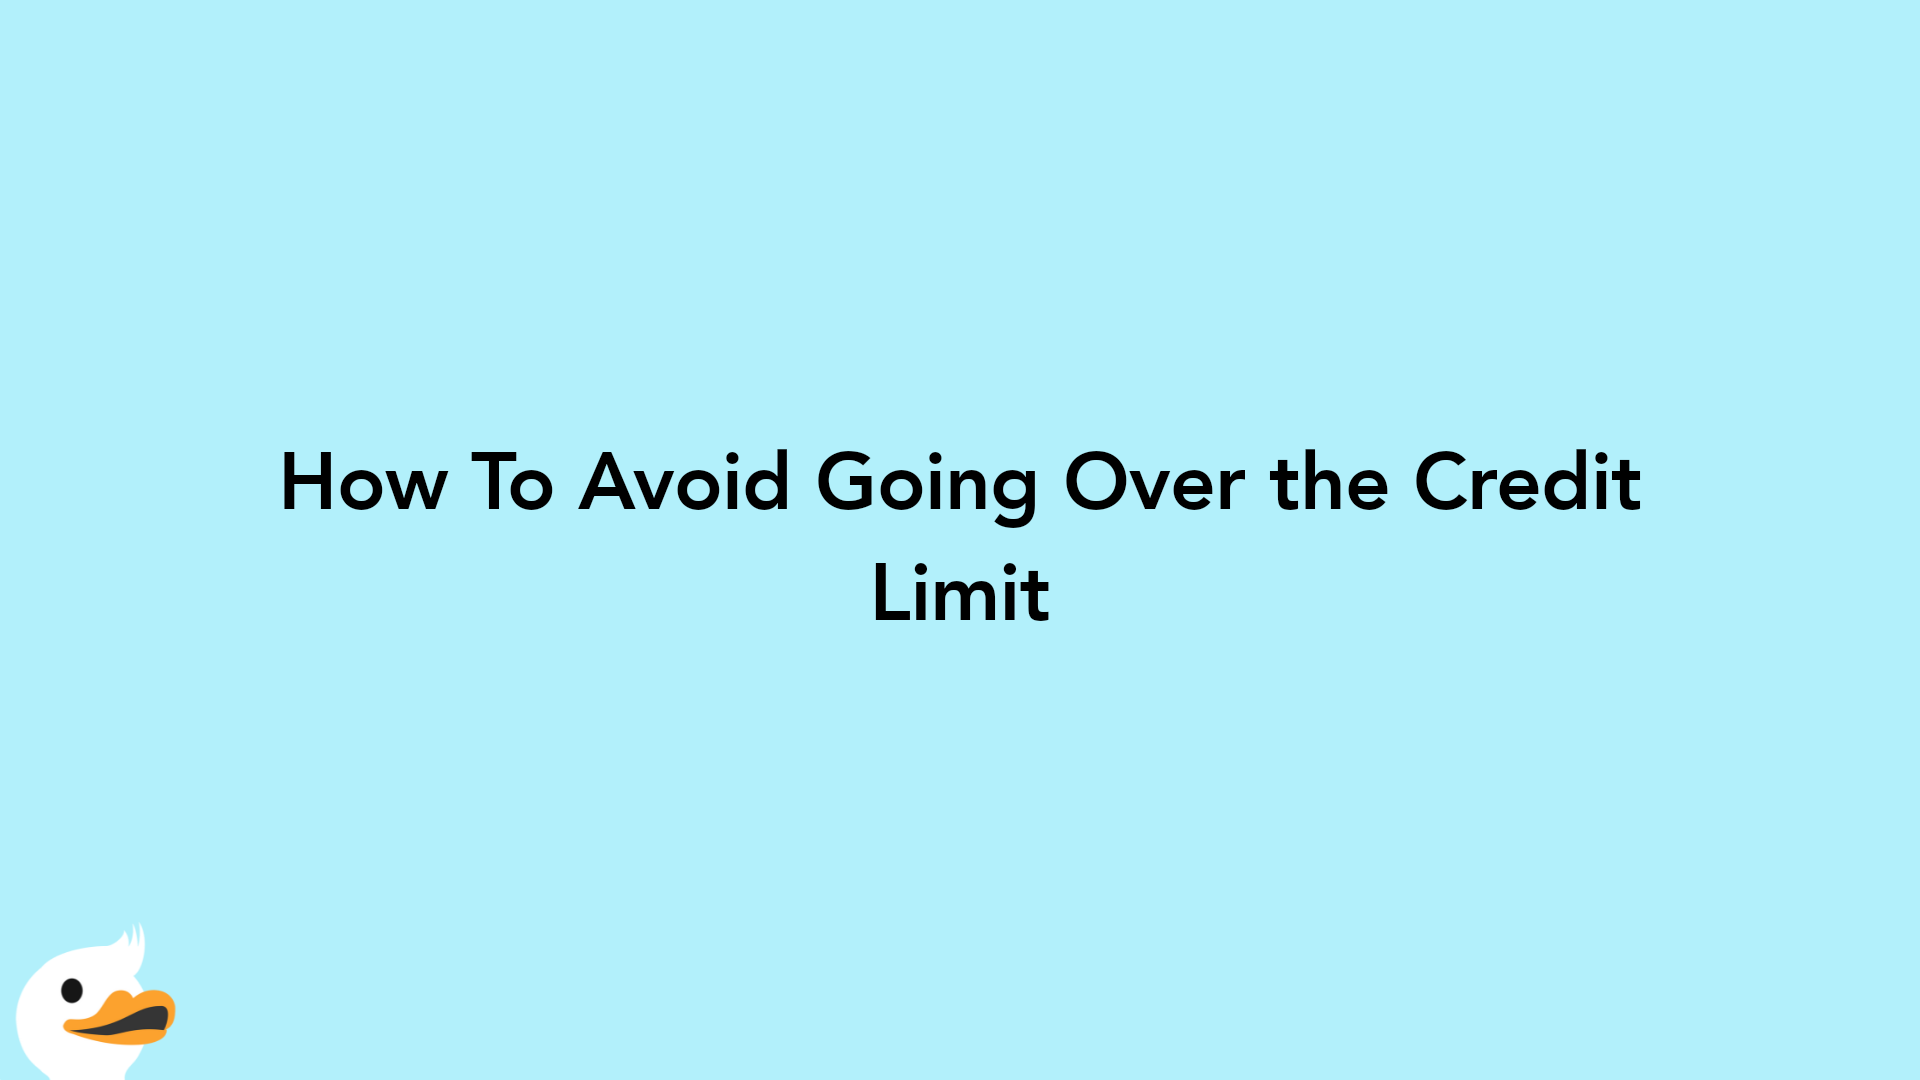 How To Avoid Going Over the Credit Limit